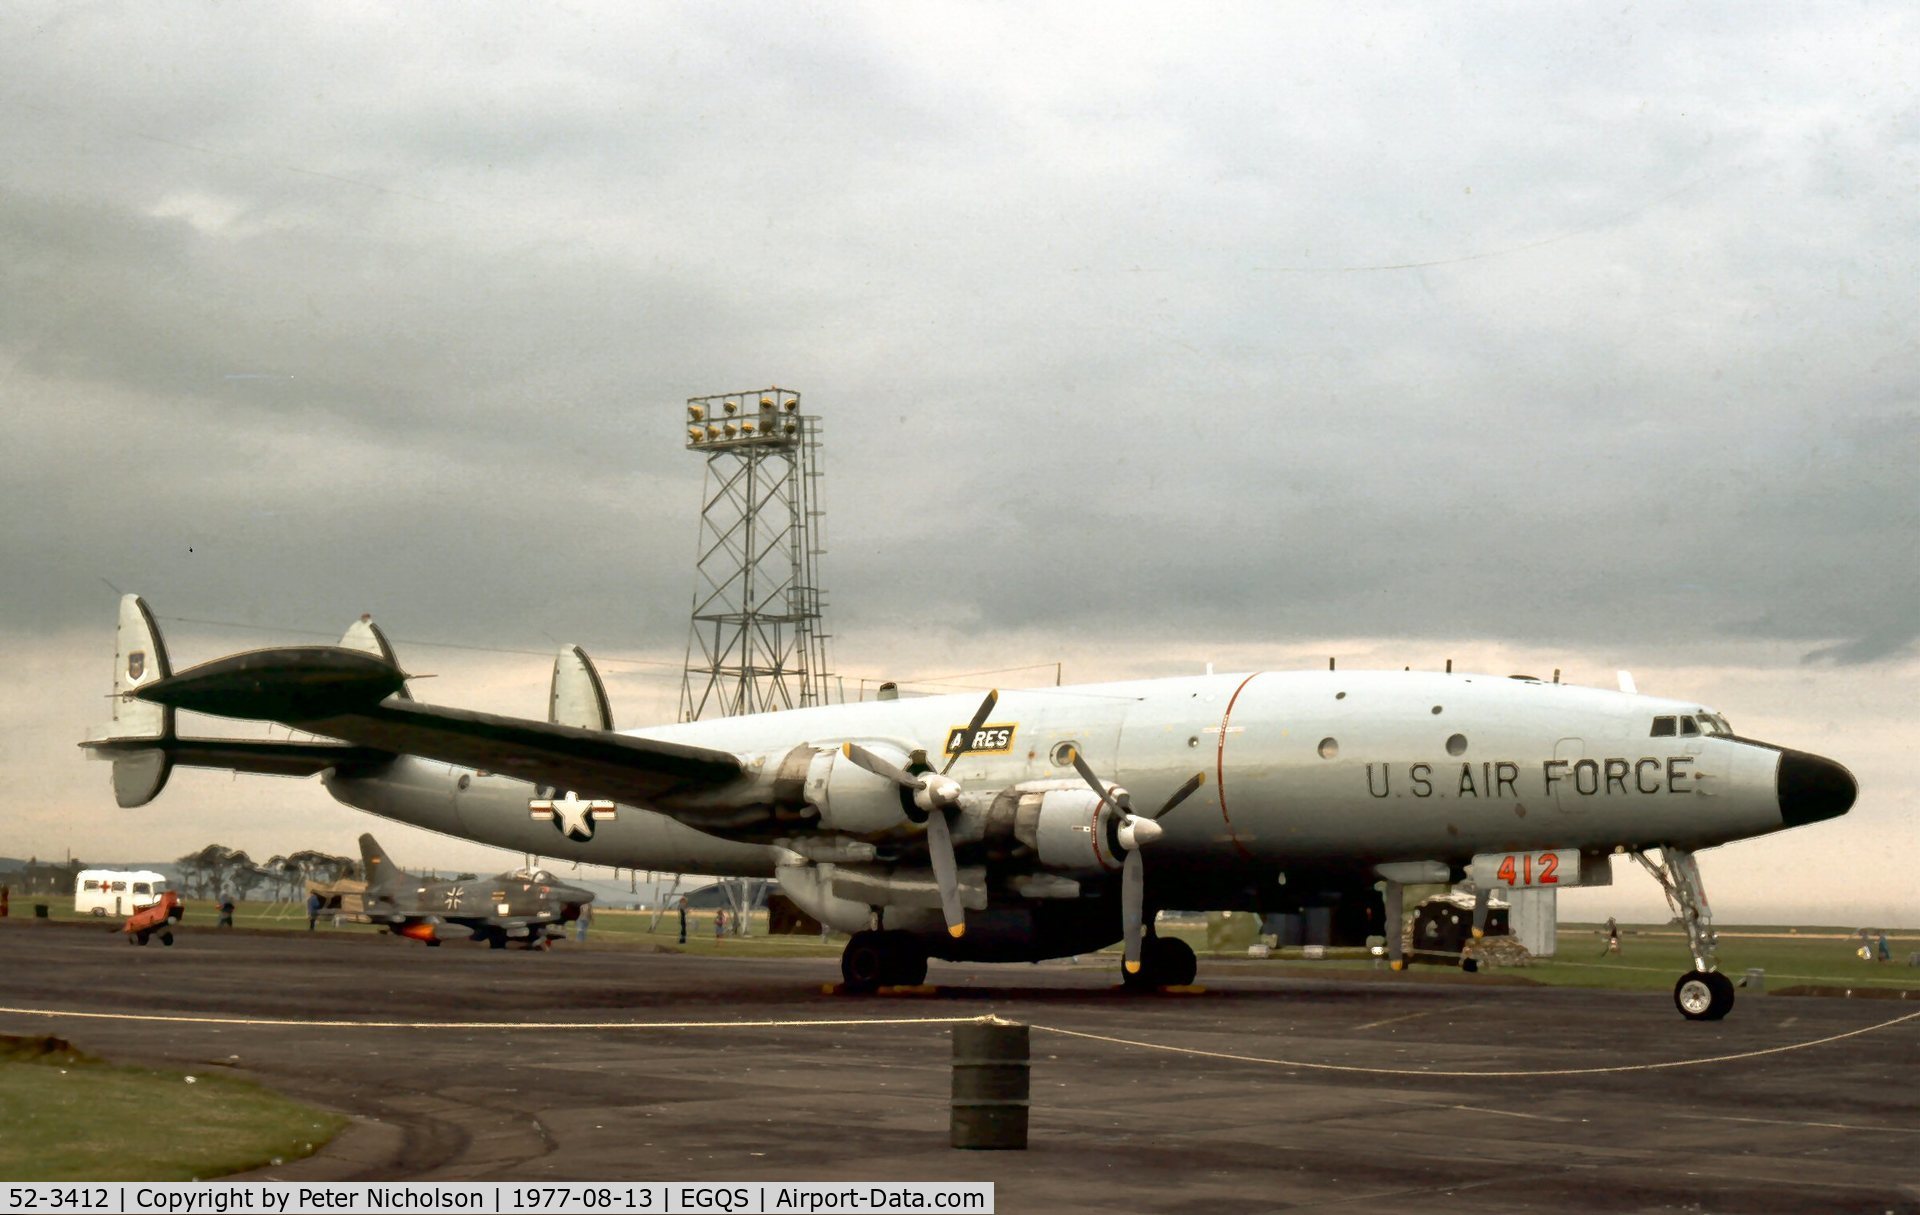 52-3412, 1952 Lockheed EC-121T Warning Star C/N 1049A-4330, Warning Star of Det 1, 20 ADS from NAS Keflavik at the 1977 RAF Lossiemouth Open Day.